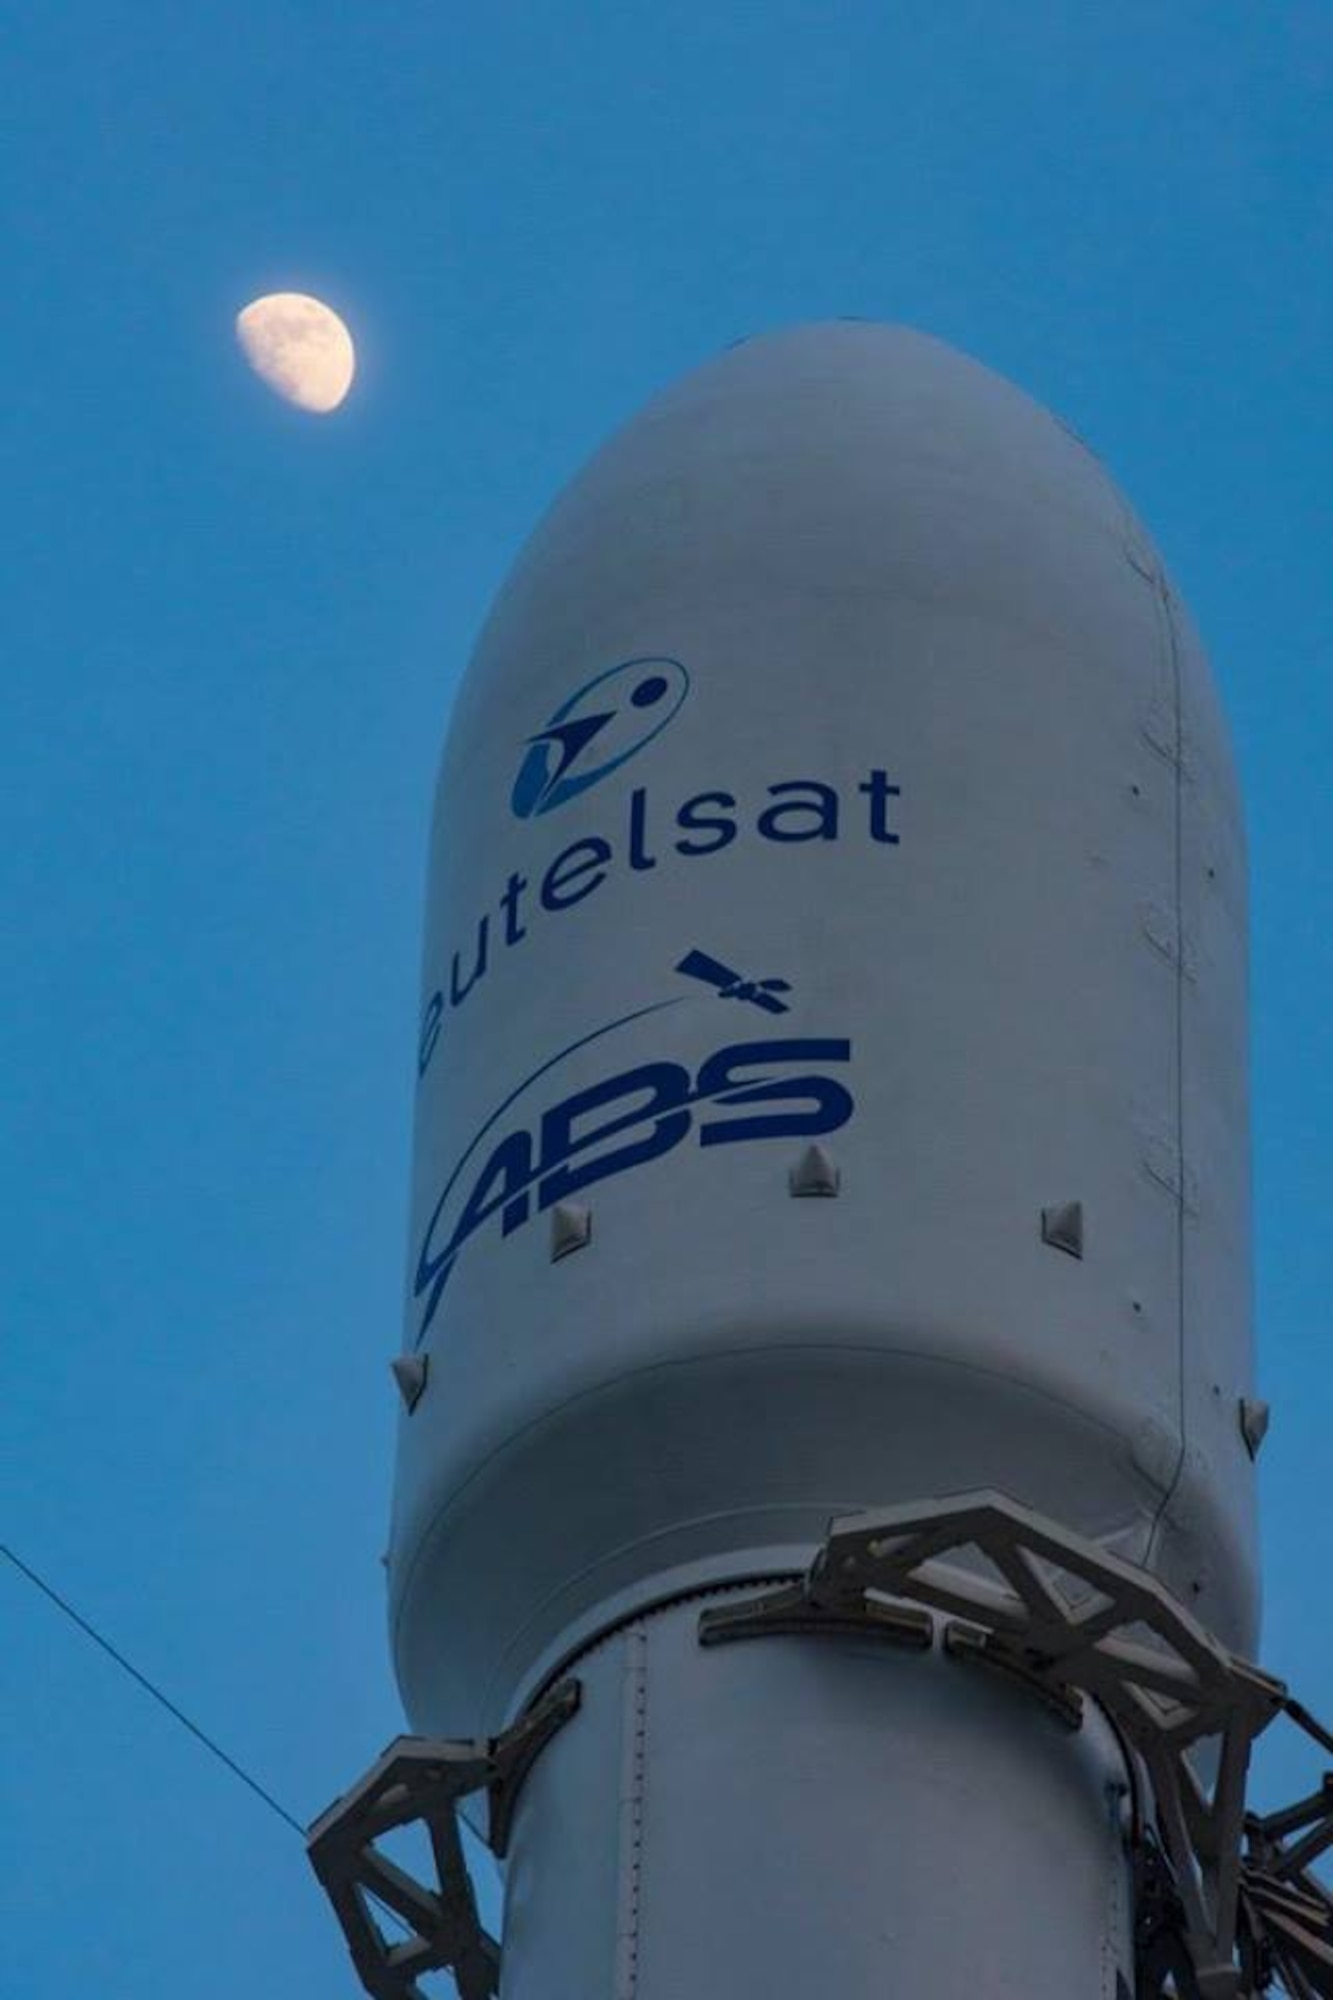 The U.S. Air Force’s 45th Space Wing supported the successful SpaceX Falcon 9 ABS/Eutelsat-2 launch June 15, 2016, at 10:29 a.m. ET from Launch Complex 40 Cape Canaveral Air Force Station, Fla. A combined team of military, government civilians and contractors from across the 45th Space Wing supported the mission with weather forecasts, launch and range operations, security, safety and public affairs.  The wing also provided its vast network of radar, telemetry and communications instrumentation to facilitate a safe launch on the Eastern Range.
